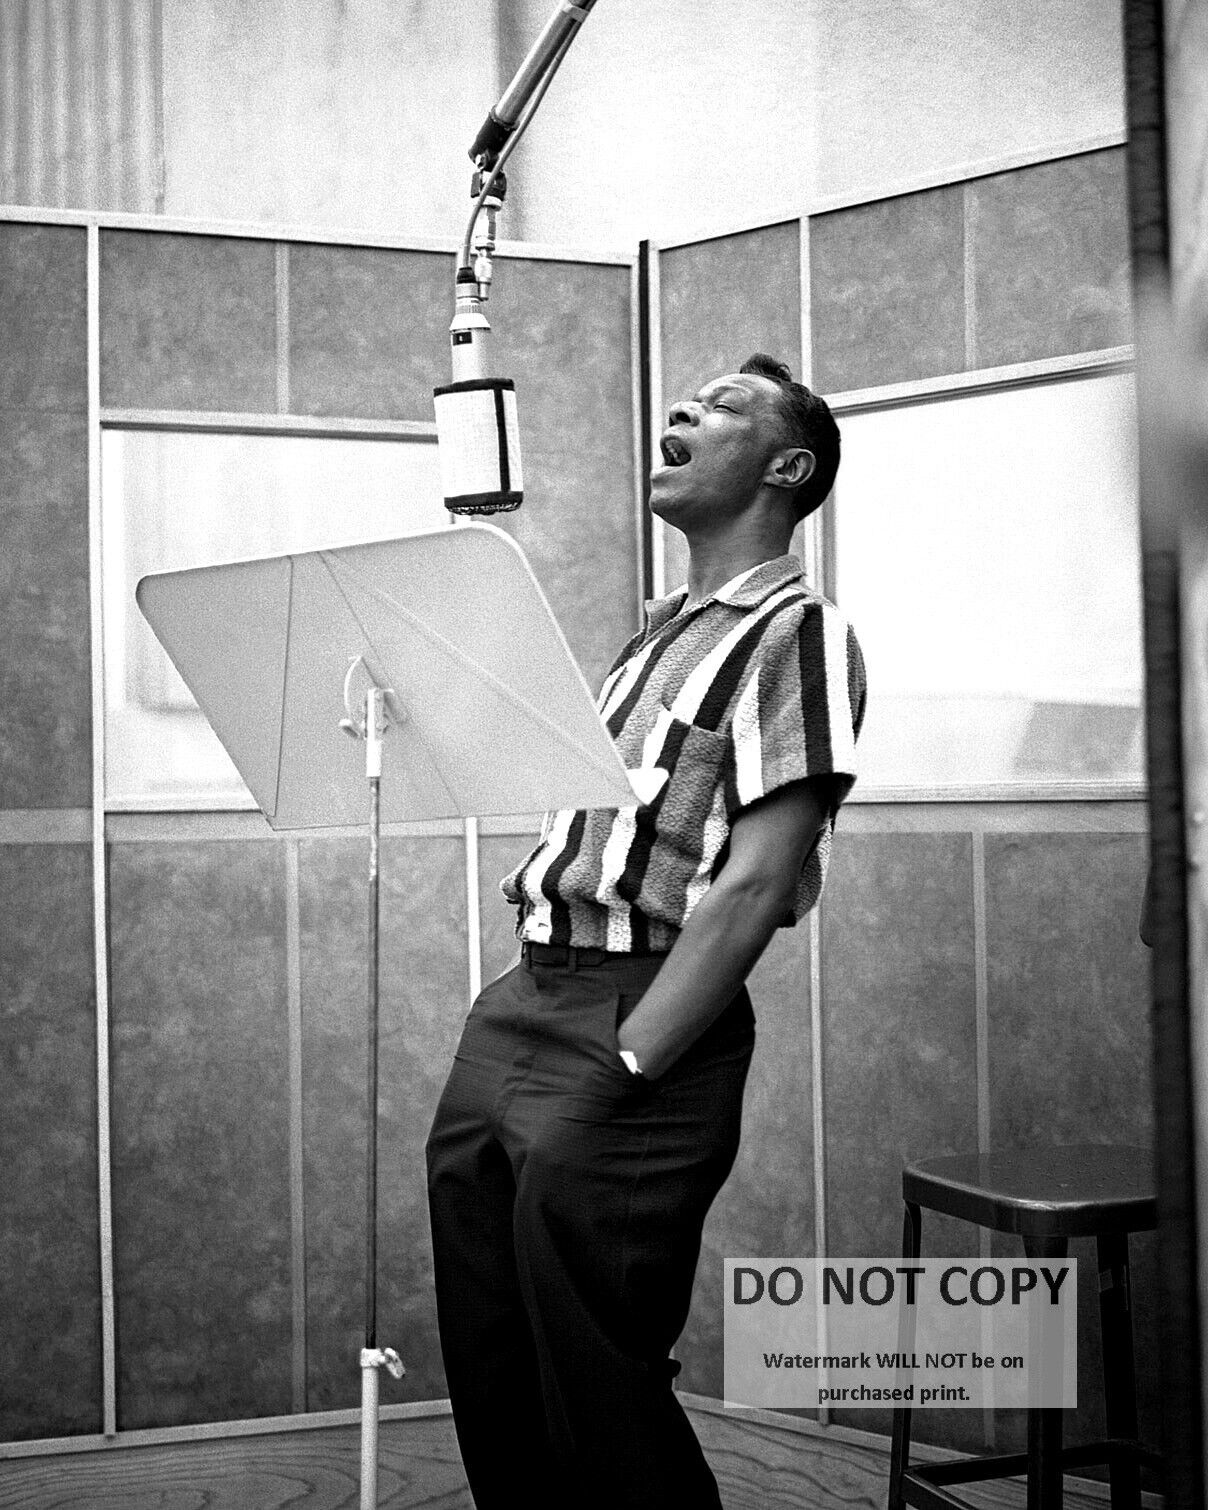 NAT KING COLE IN THE RECORDING STUDIO - 8X10 PUBLICITY PHOTO (EE-301)